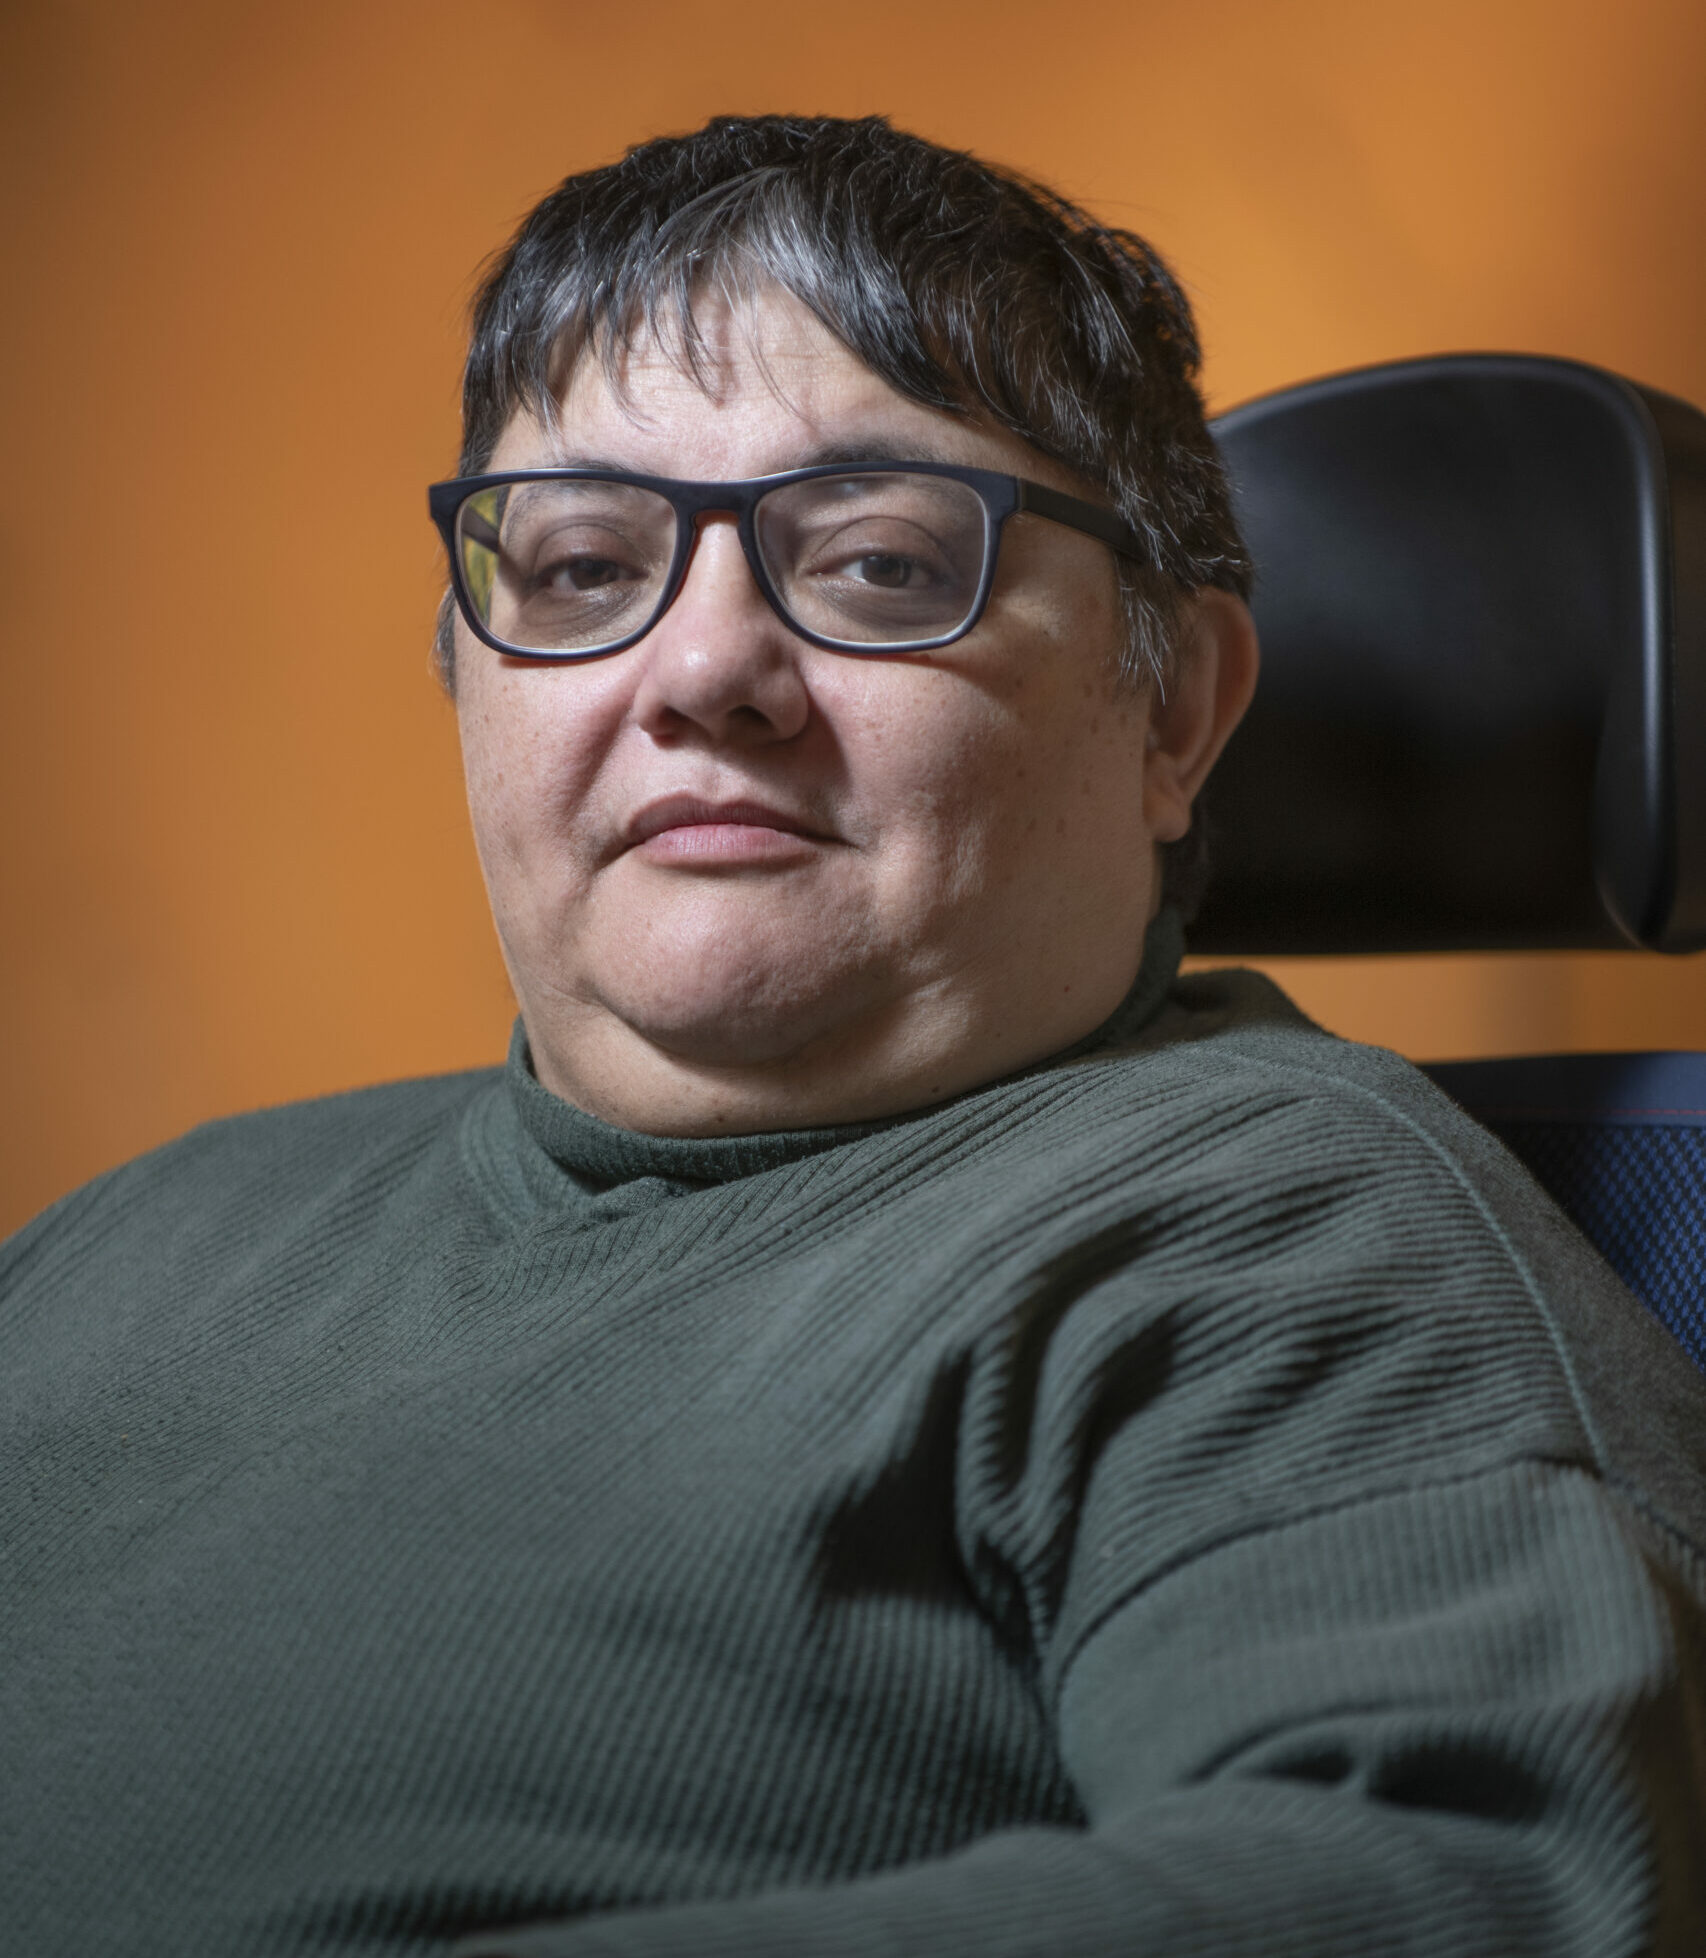 Suchi is a white woman with brown short hair who wears glasses. She is wearing a green jumper and sitting in a wheelchair.